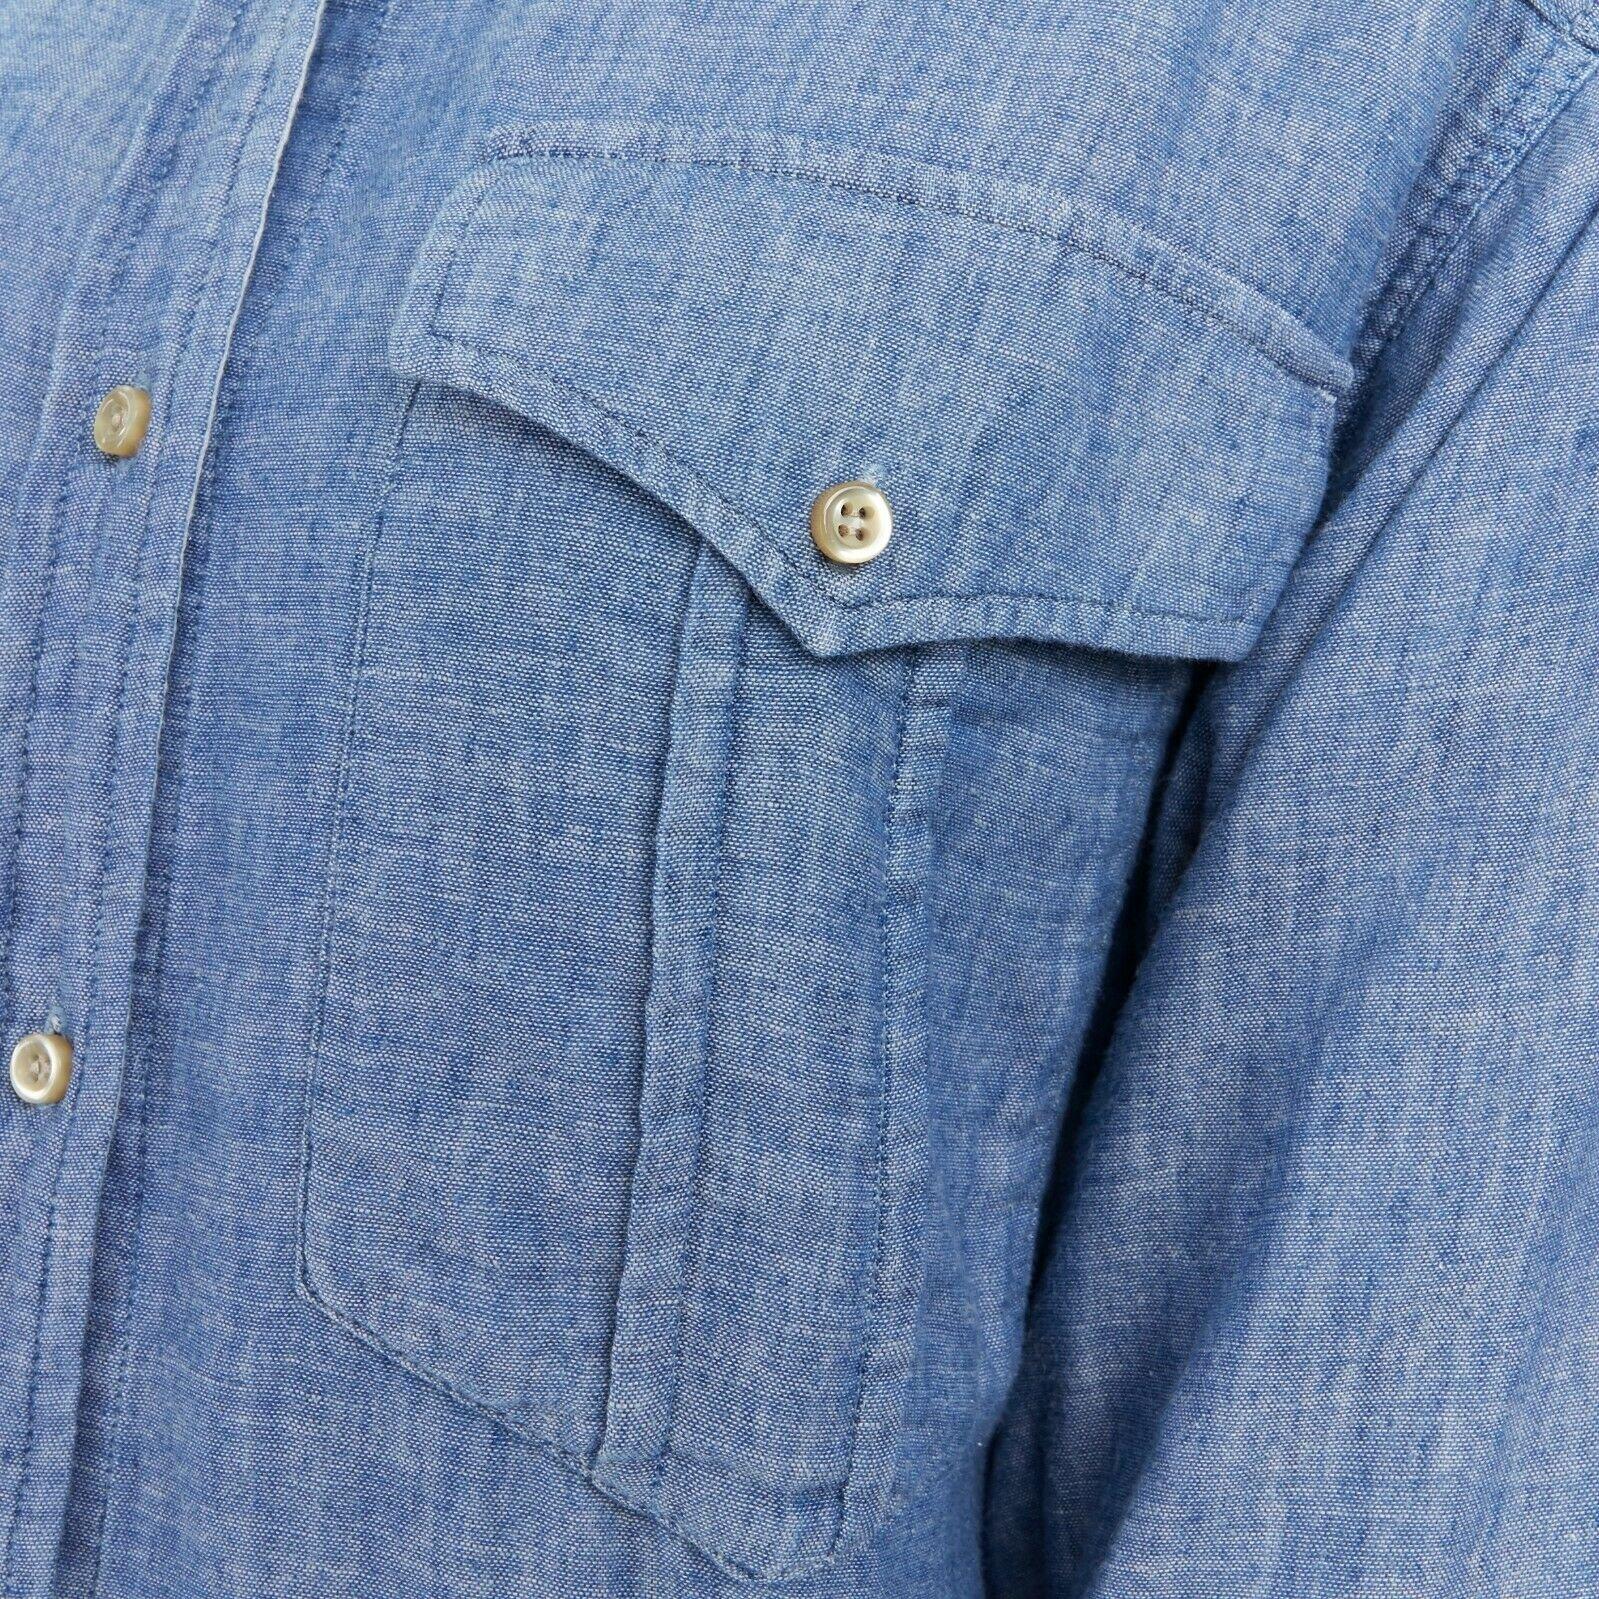 ISABEL MARANT ETOILE 100% cotton light chambray dual breast pocket shirt FR36 
Reference: LNKO/A01065 
Brand: Isabel Marant 
Designer: Isabel Marant 
Material: Cotton 
Color: Blue 
Pattern: Solid 
Closure: Button 
Extra Detail: 100% cotton. Light